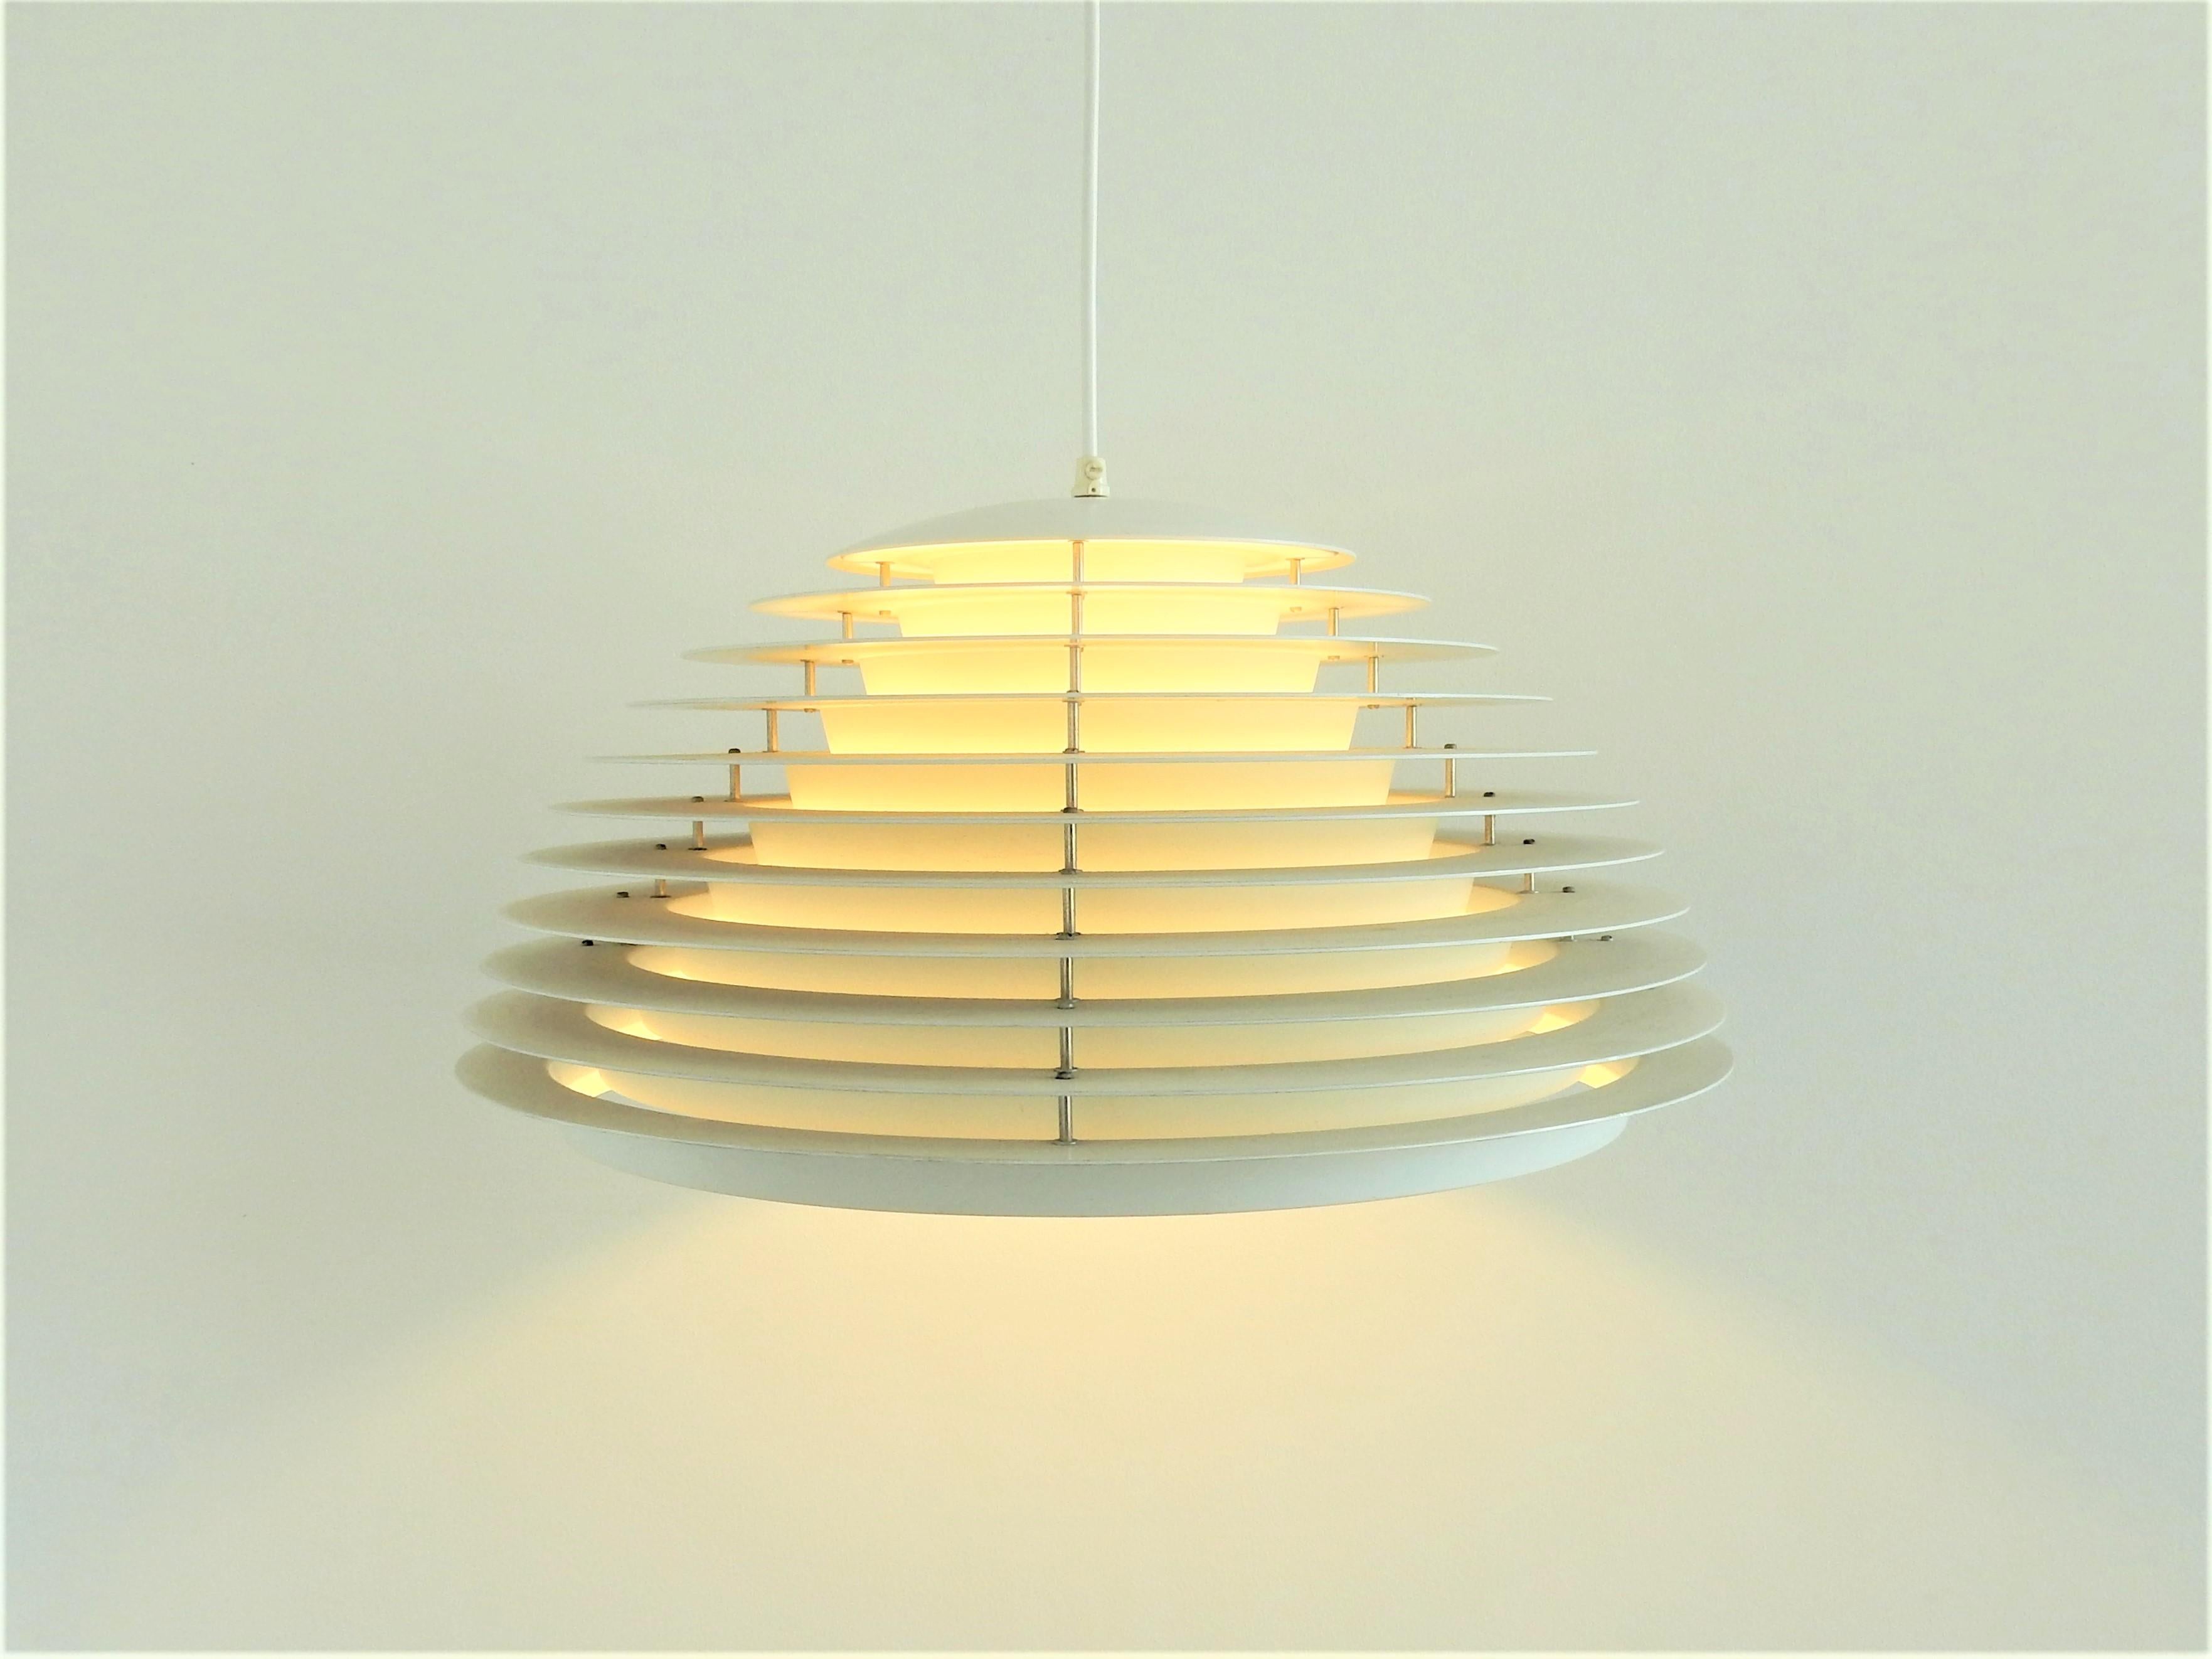 This beautiful and solid pendant lamp was designed by Jon Olafsson and P.B. Lútherson for Fog & Mørup in Denmark. A heavy metal pendant that consists out of metal rings attached together. When lit, the metal rings also make a pyramid shape if you